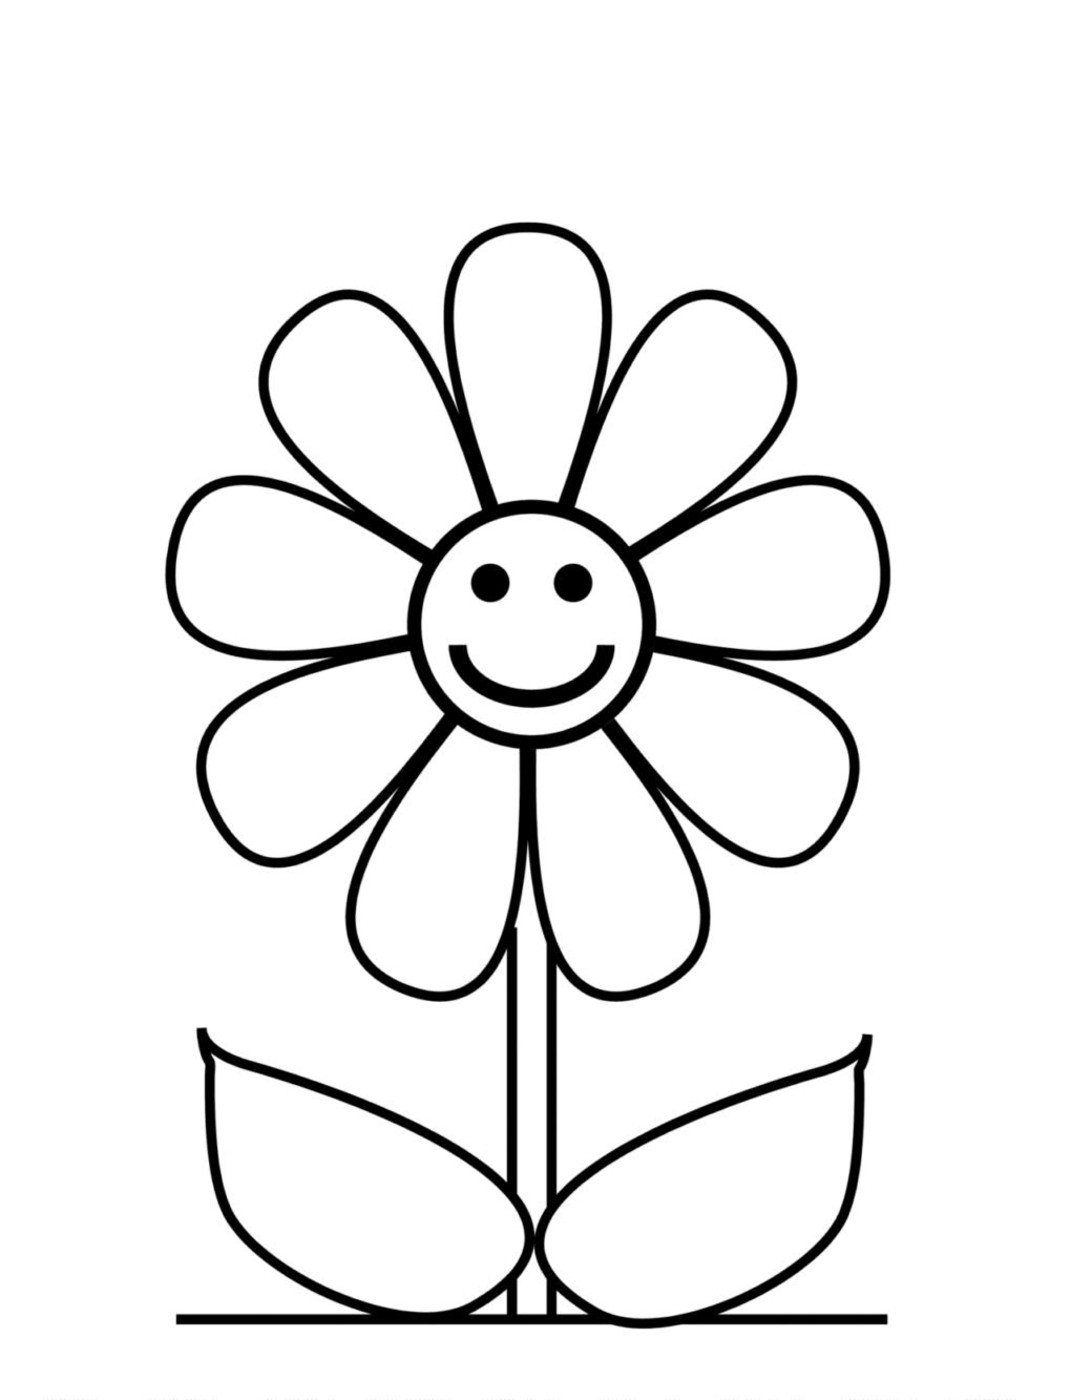 Flower Picture To Color : Coloring - Kids Coloring Pages